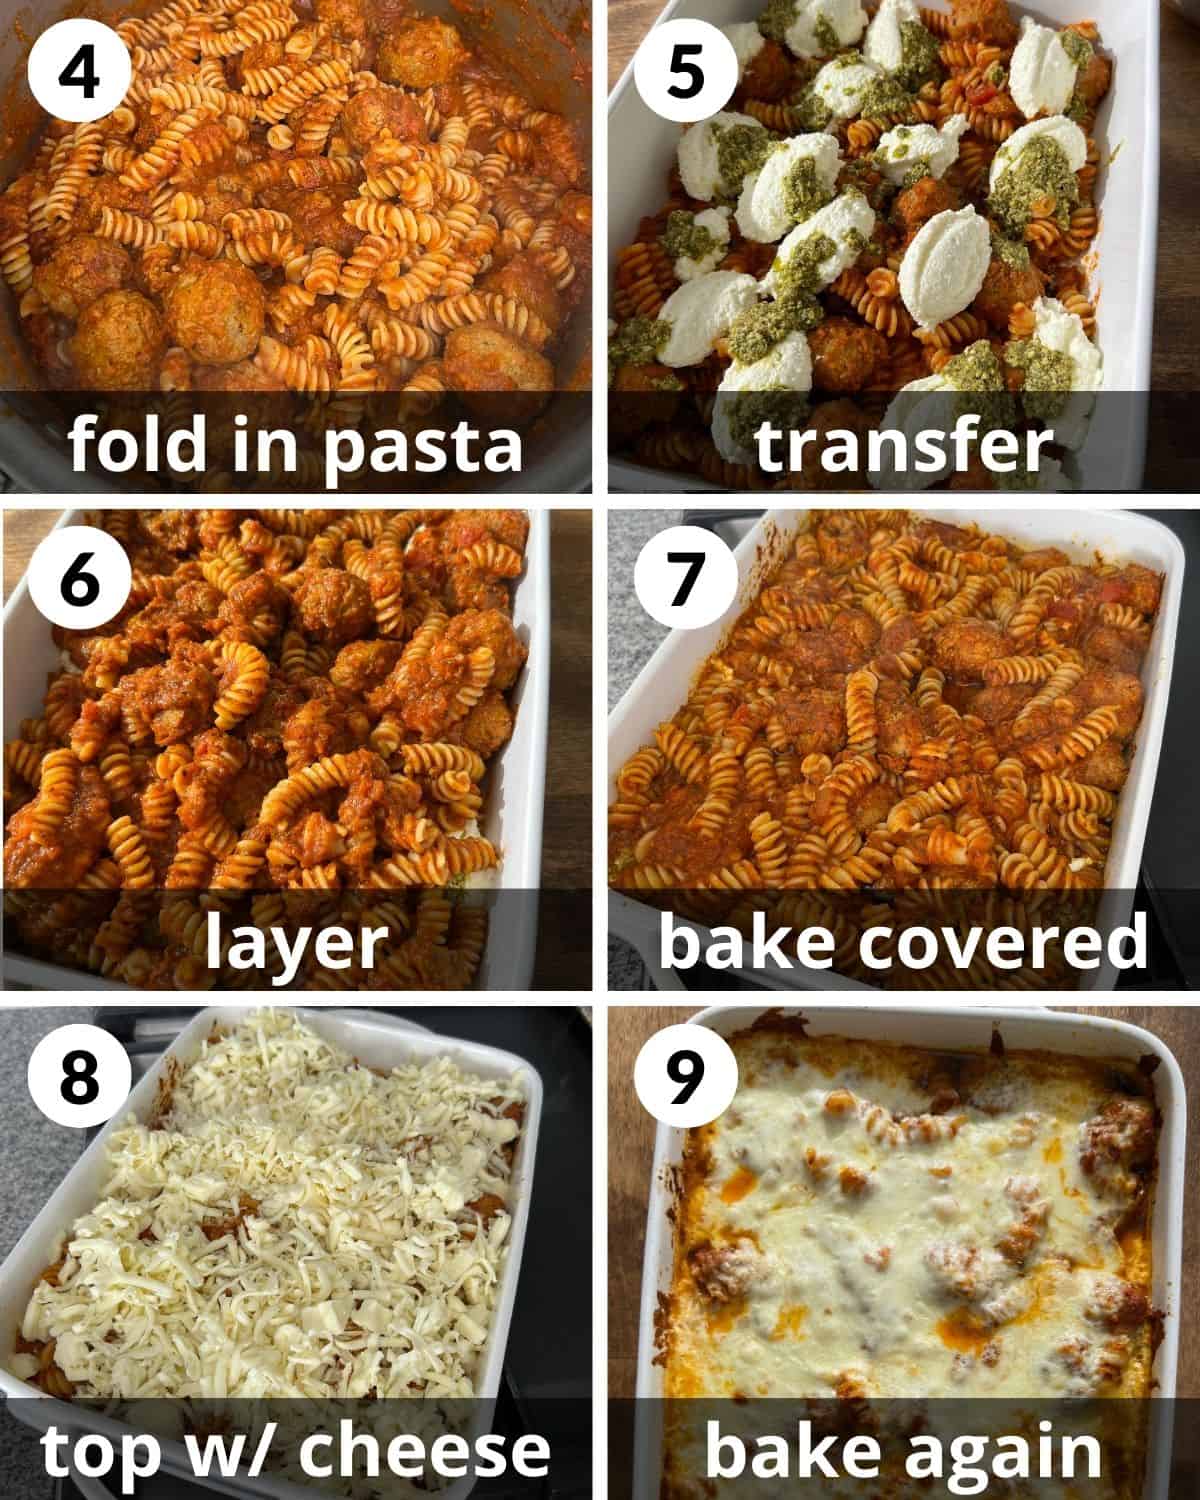 A 6 photo collage showing the final assembly of meatball pasta bake.